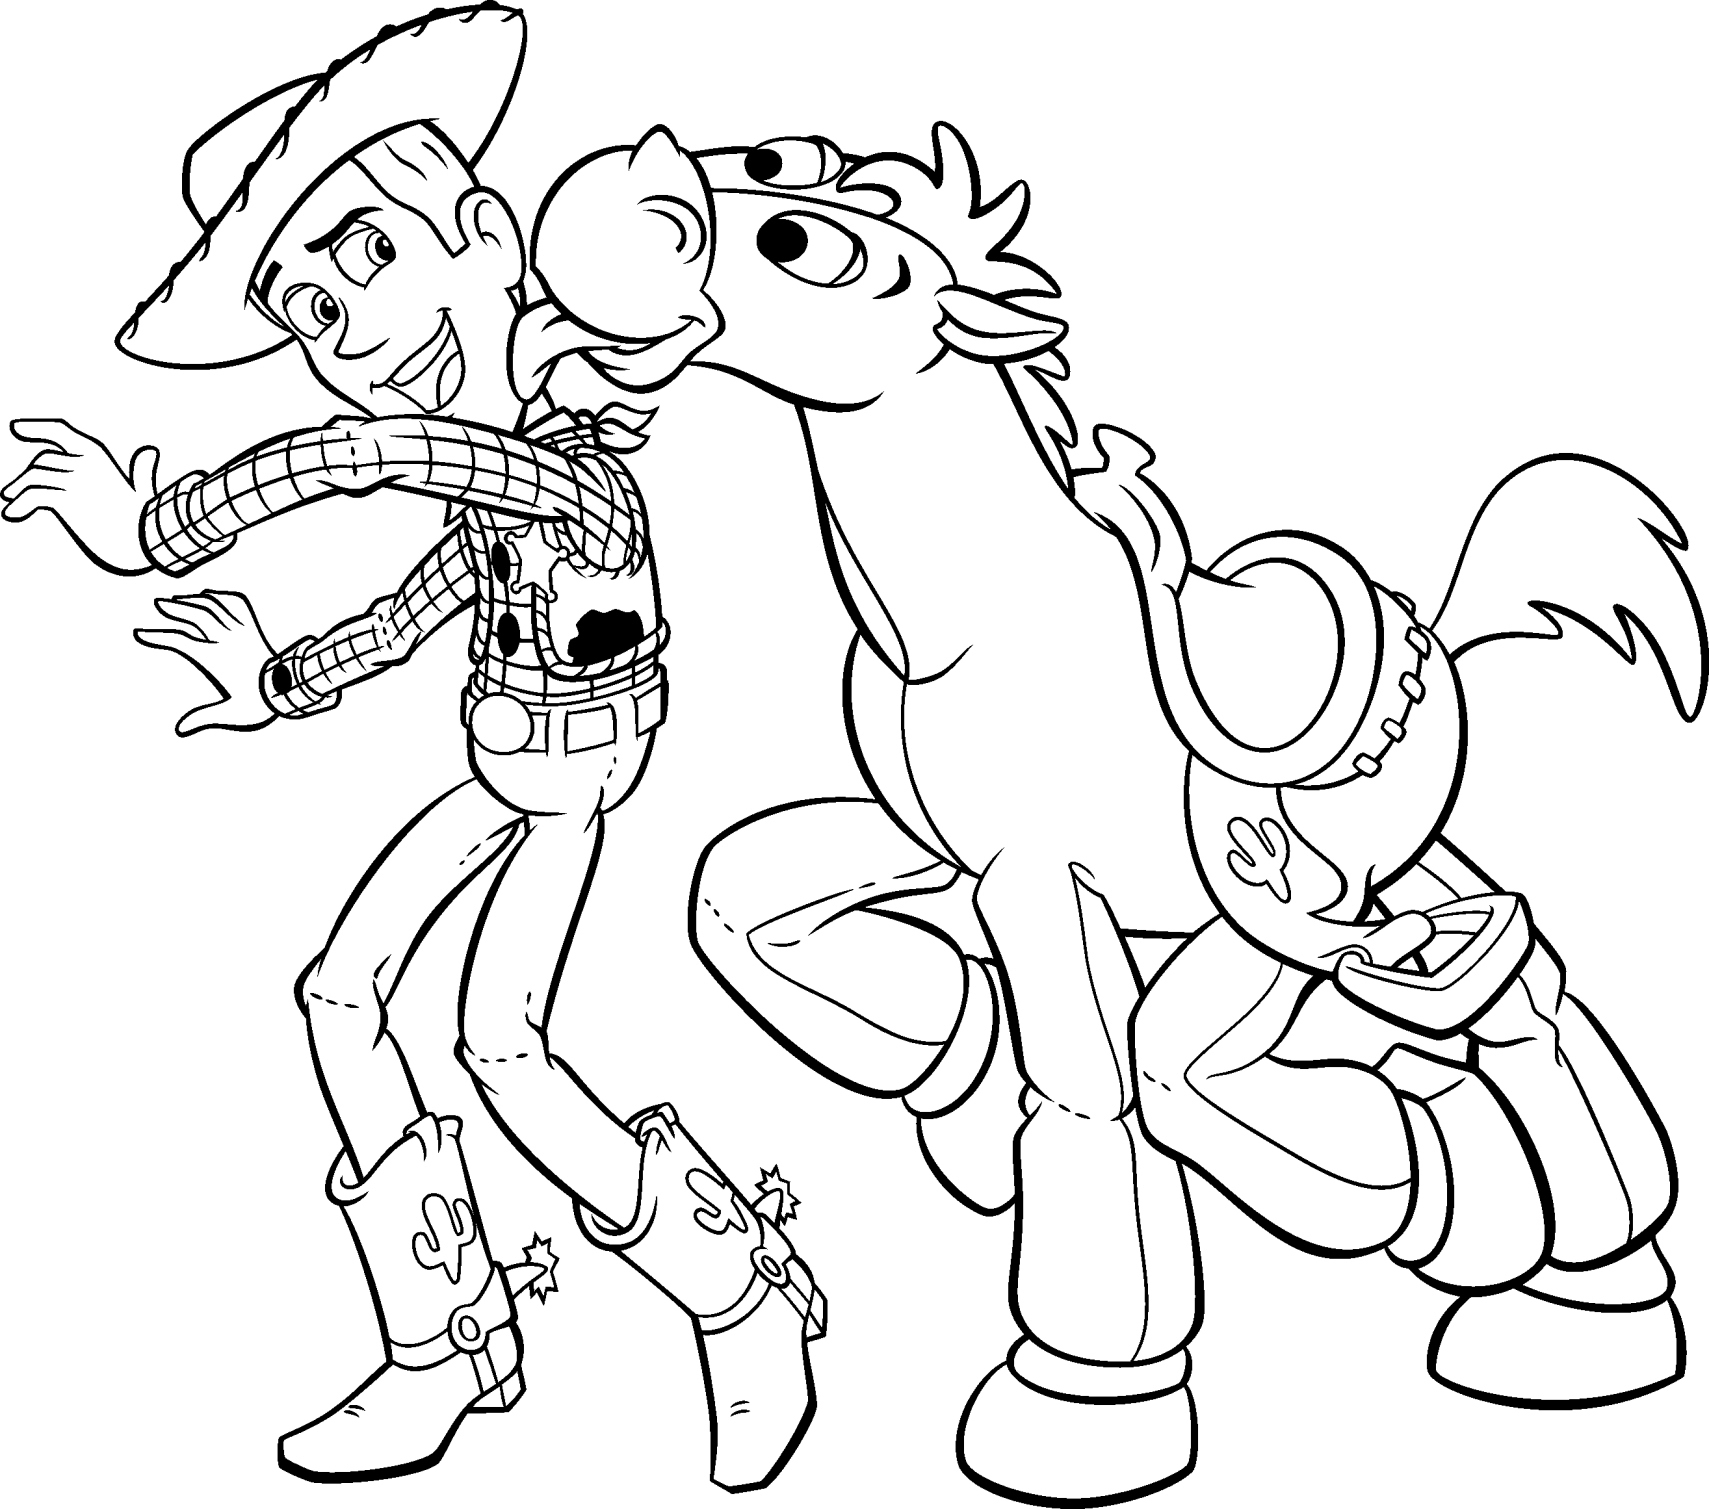 Toy Story (without colour) - Toy Story 3 Photo (13456127) - Fanpop